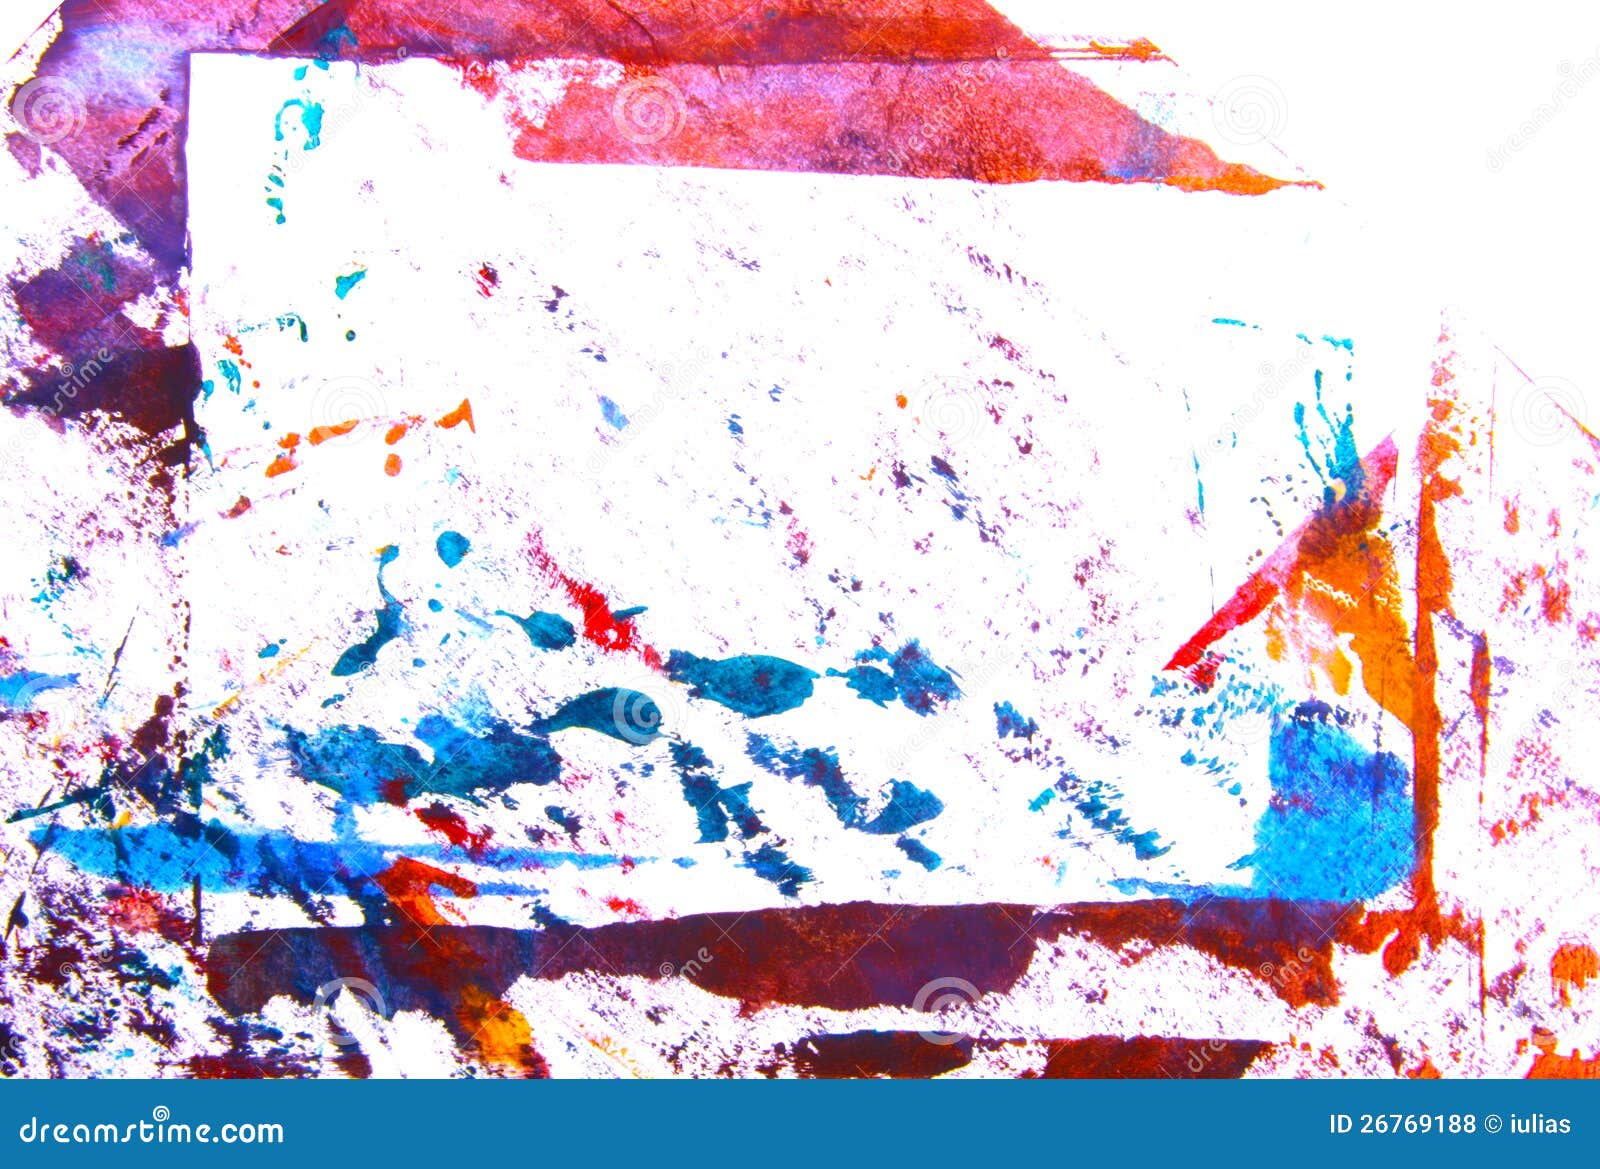 Abstract Hand Drawn Painting Graphics Royalty Free Stock